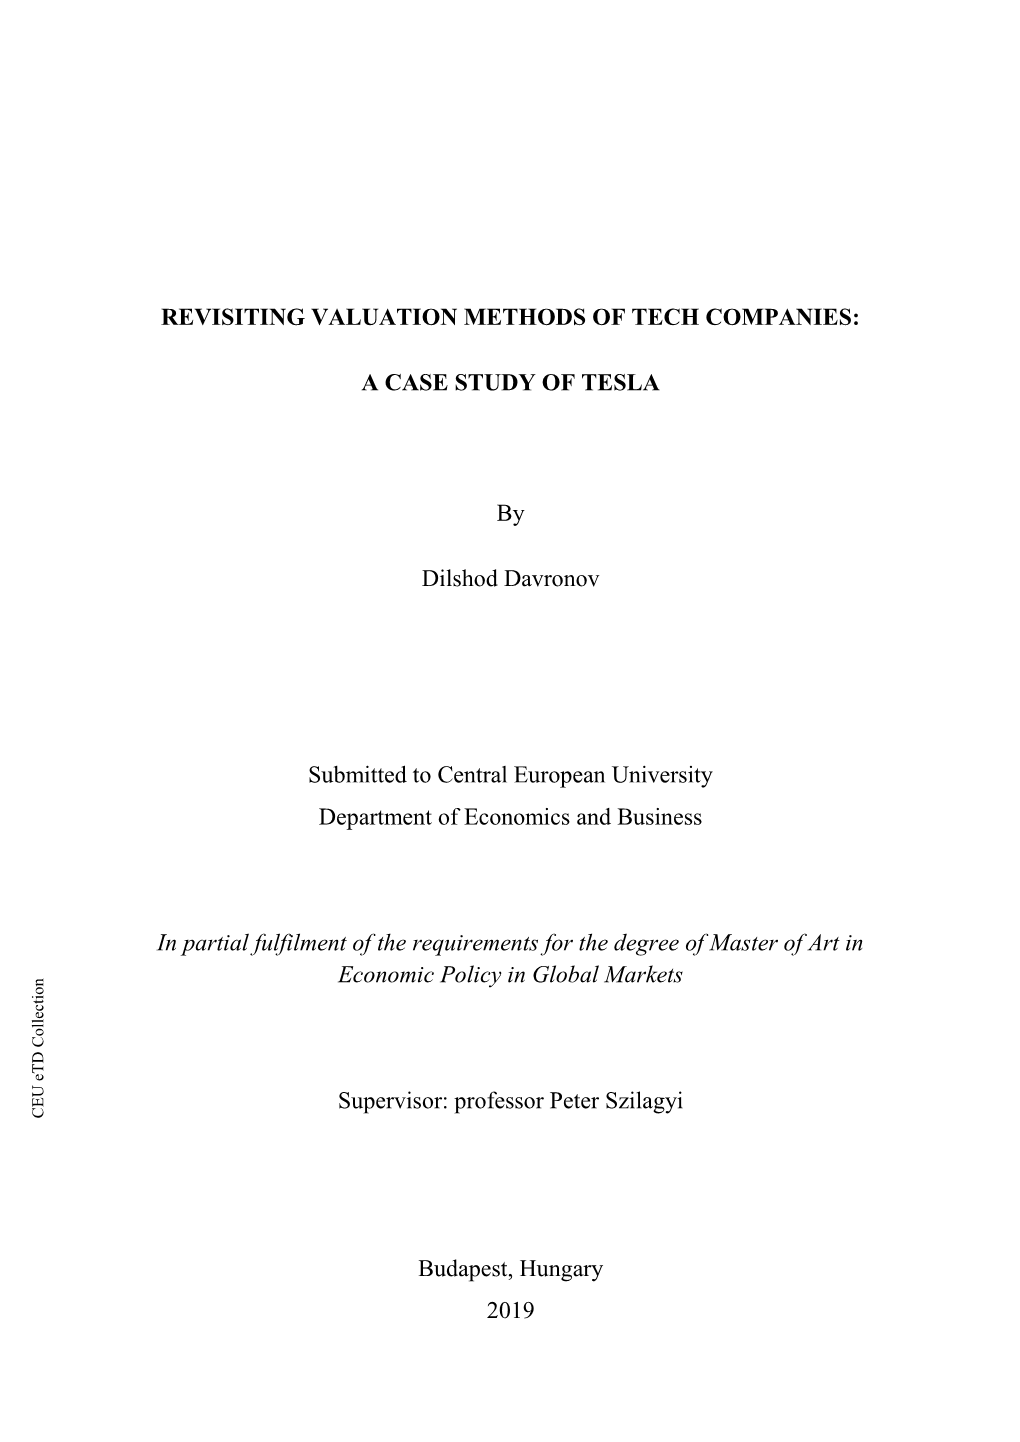 Revisiting Valuation Methods of Tech Companies: a Case